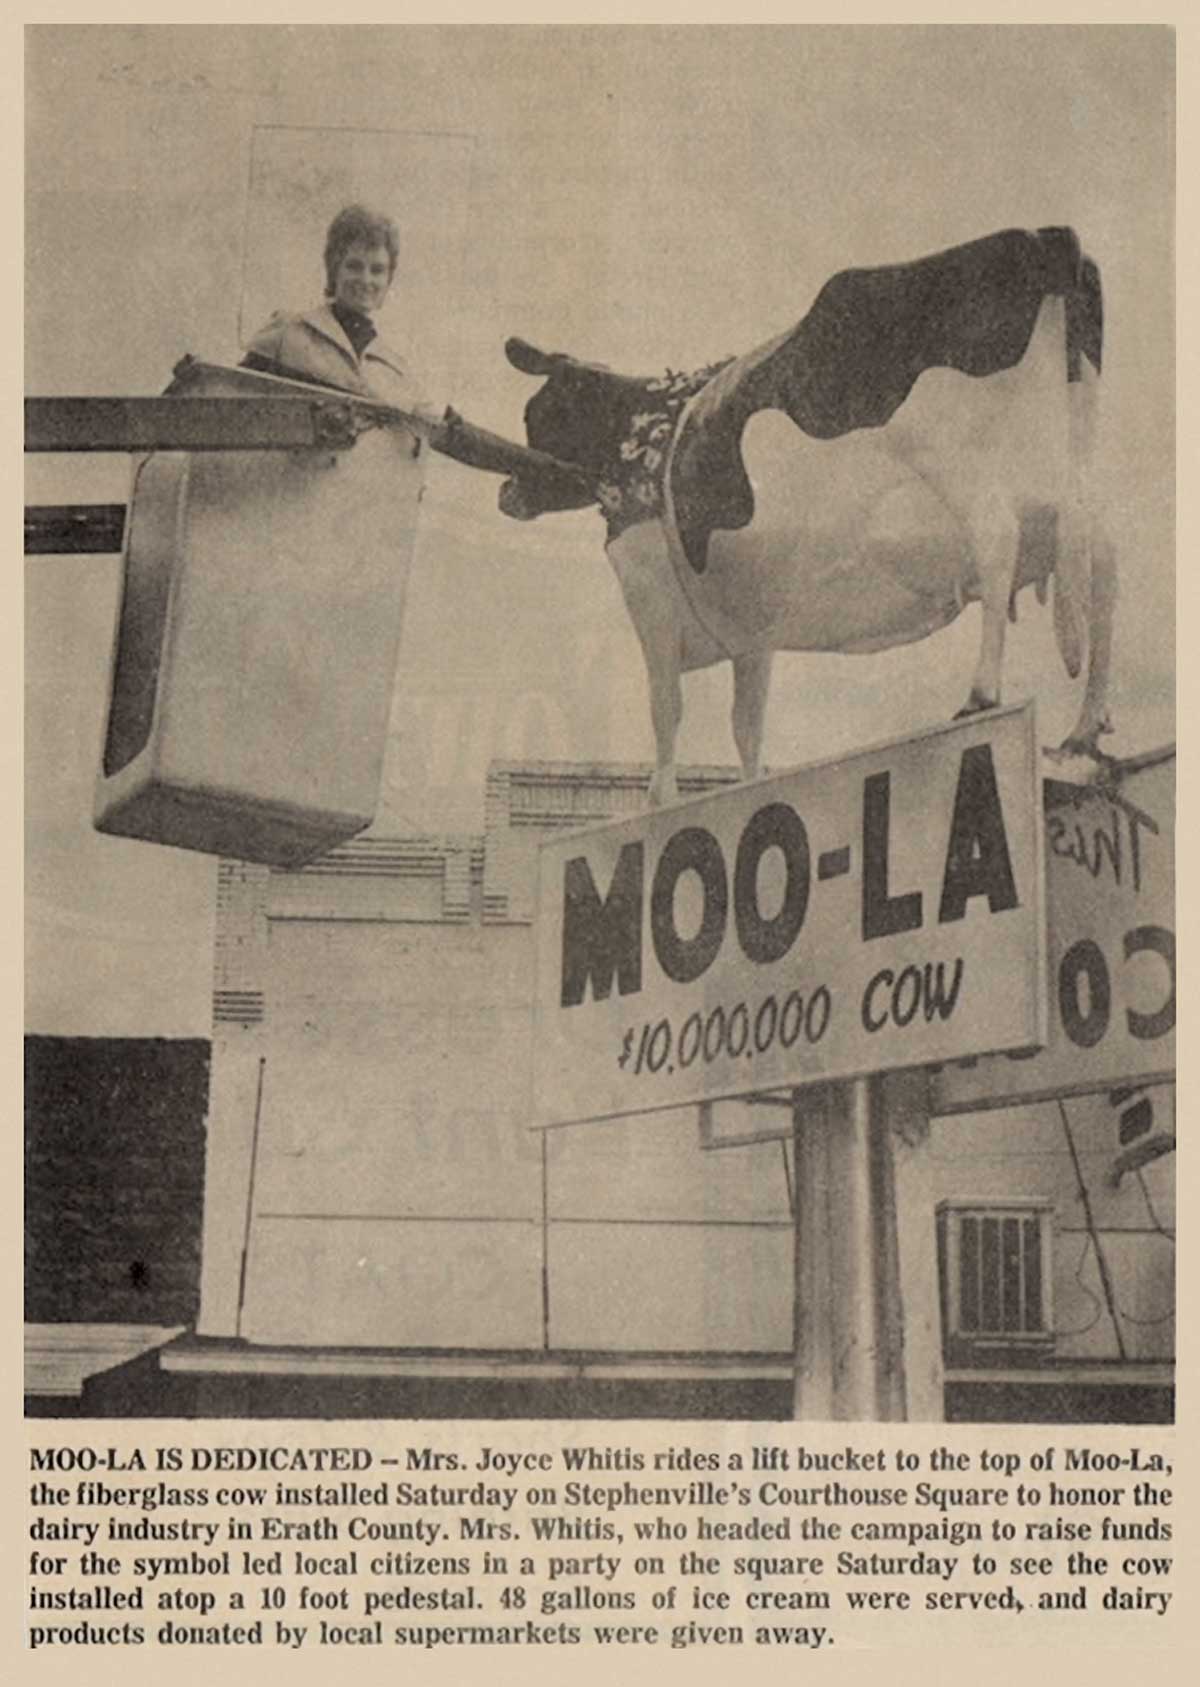 A vintage newspaper clipping featuring the Moo-La sculpture's installation and Mrs. Joyce Whitis